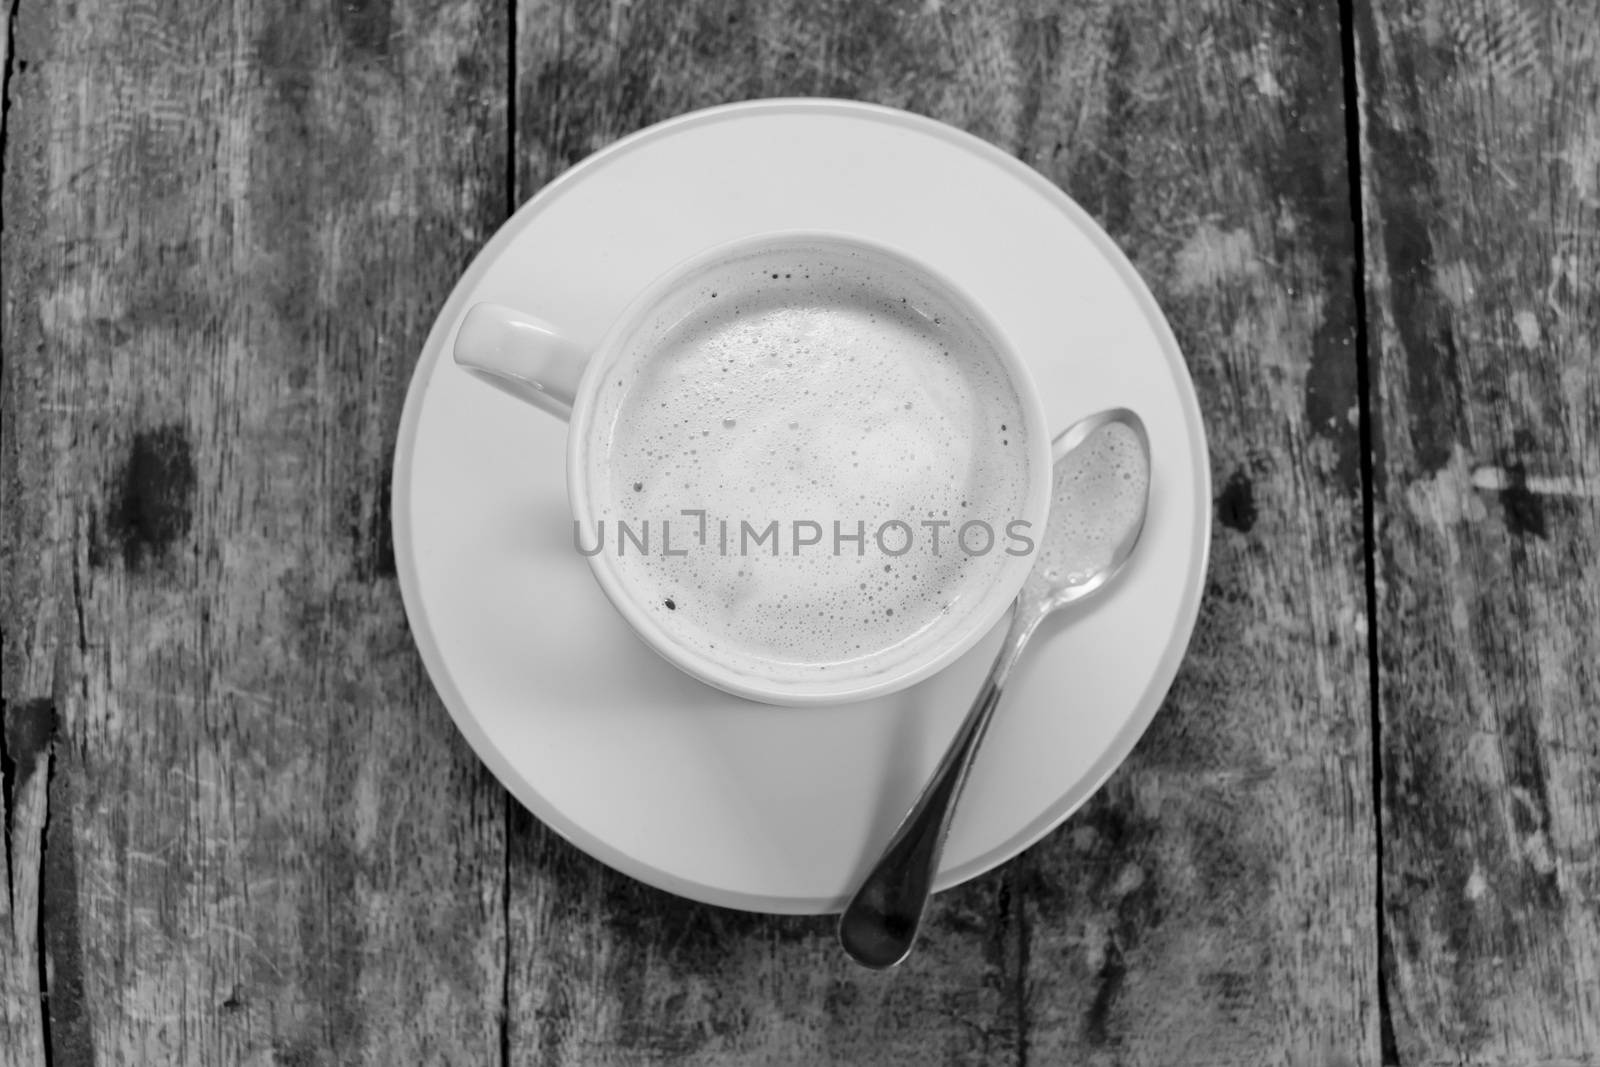 Black and White A cup of cafe latte by art9858